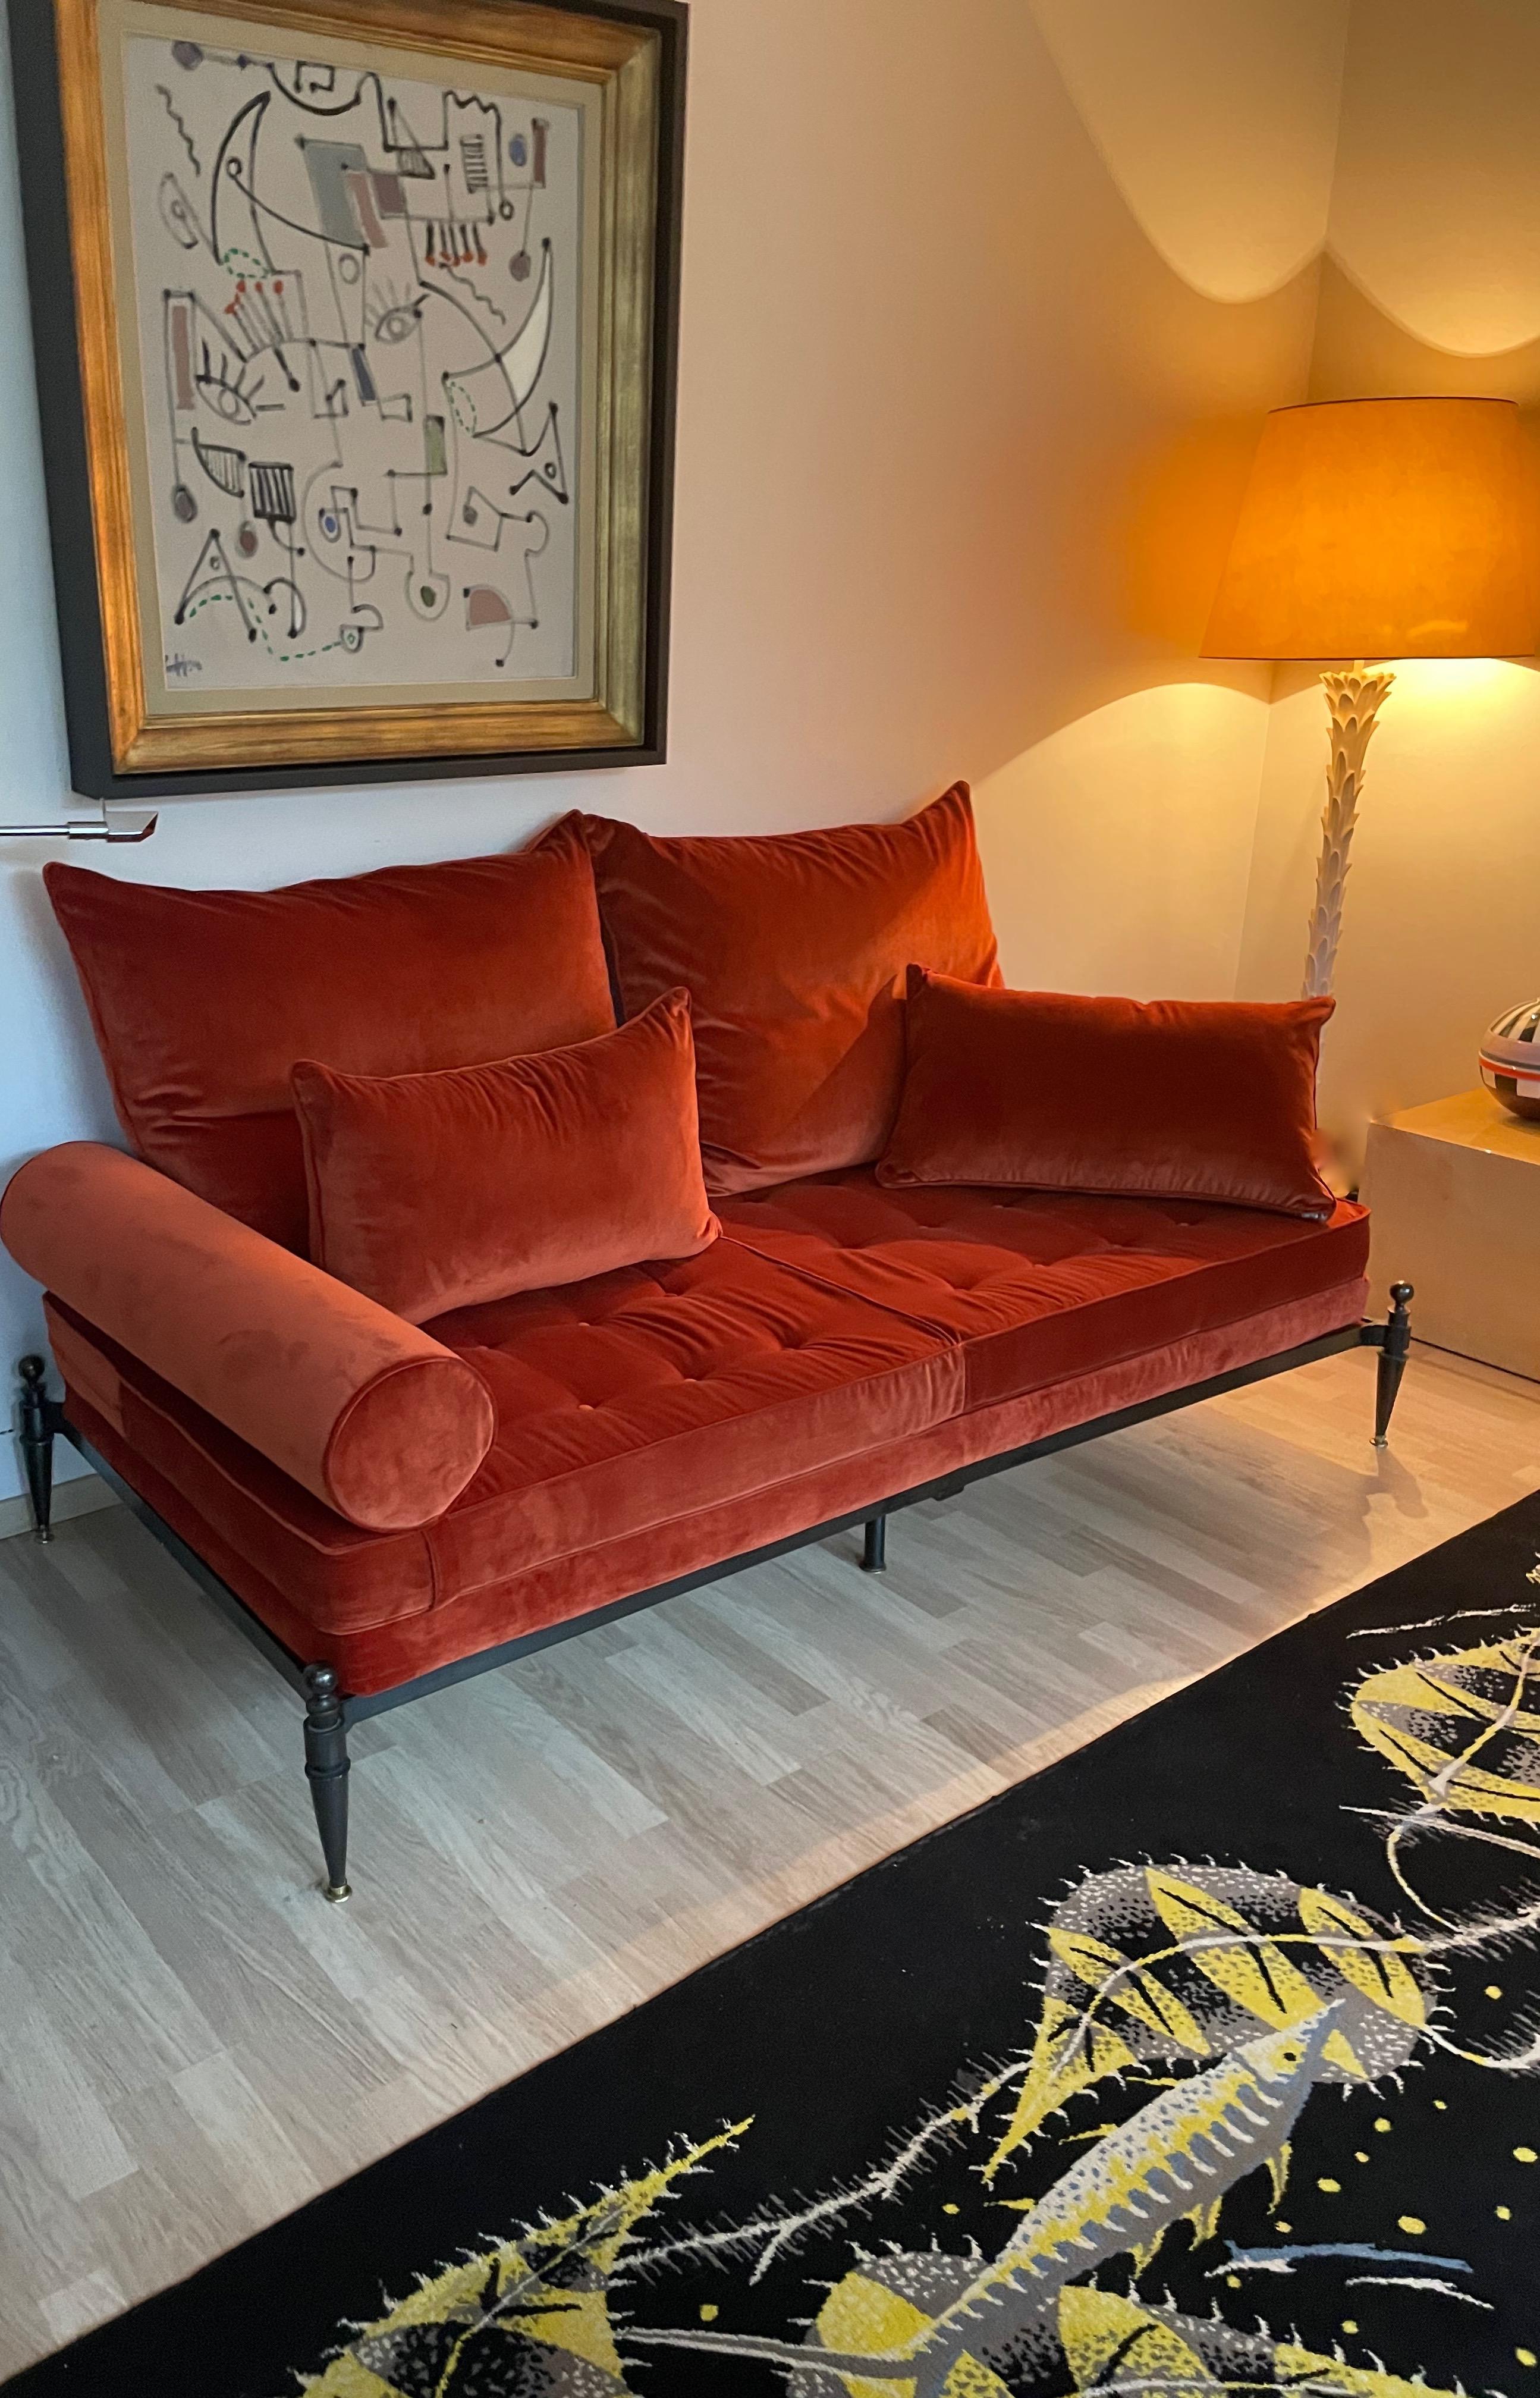 Neoclassical bronze sofa recently reupholstert in rust color velvet ( City velvet collection CarluccI - JAB ), feat cushions, two  bolsters available.
Designed by Jaques Quinet-France.
Circa 1948.